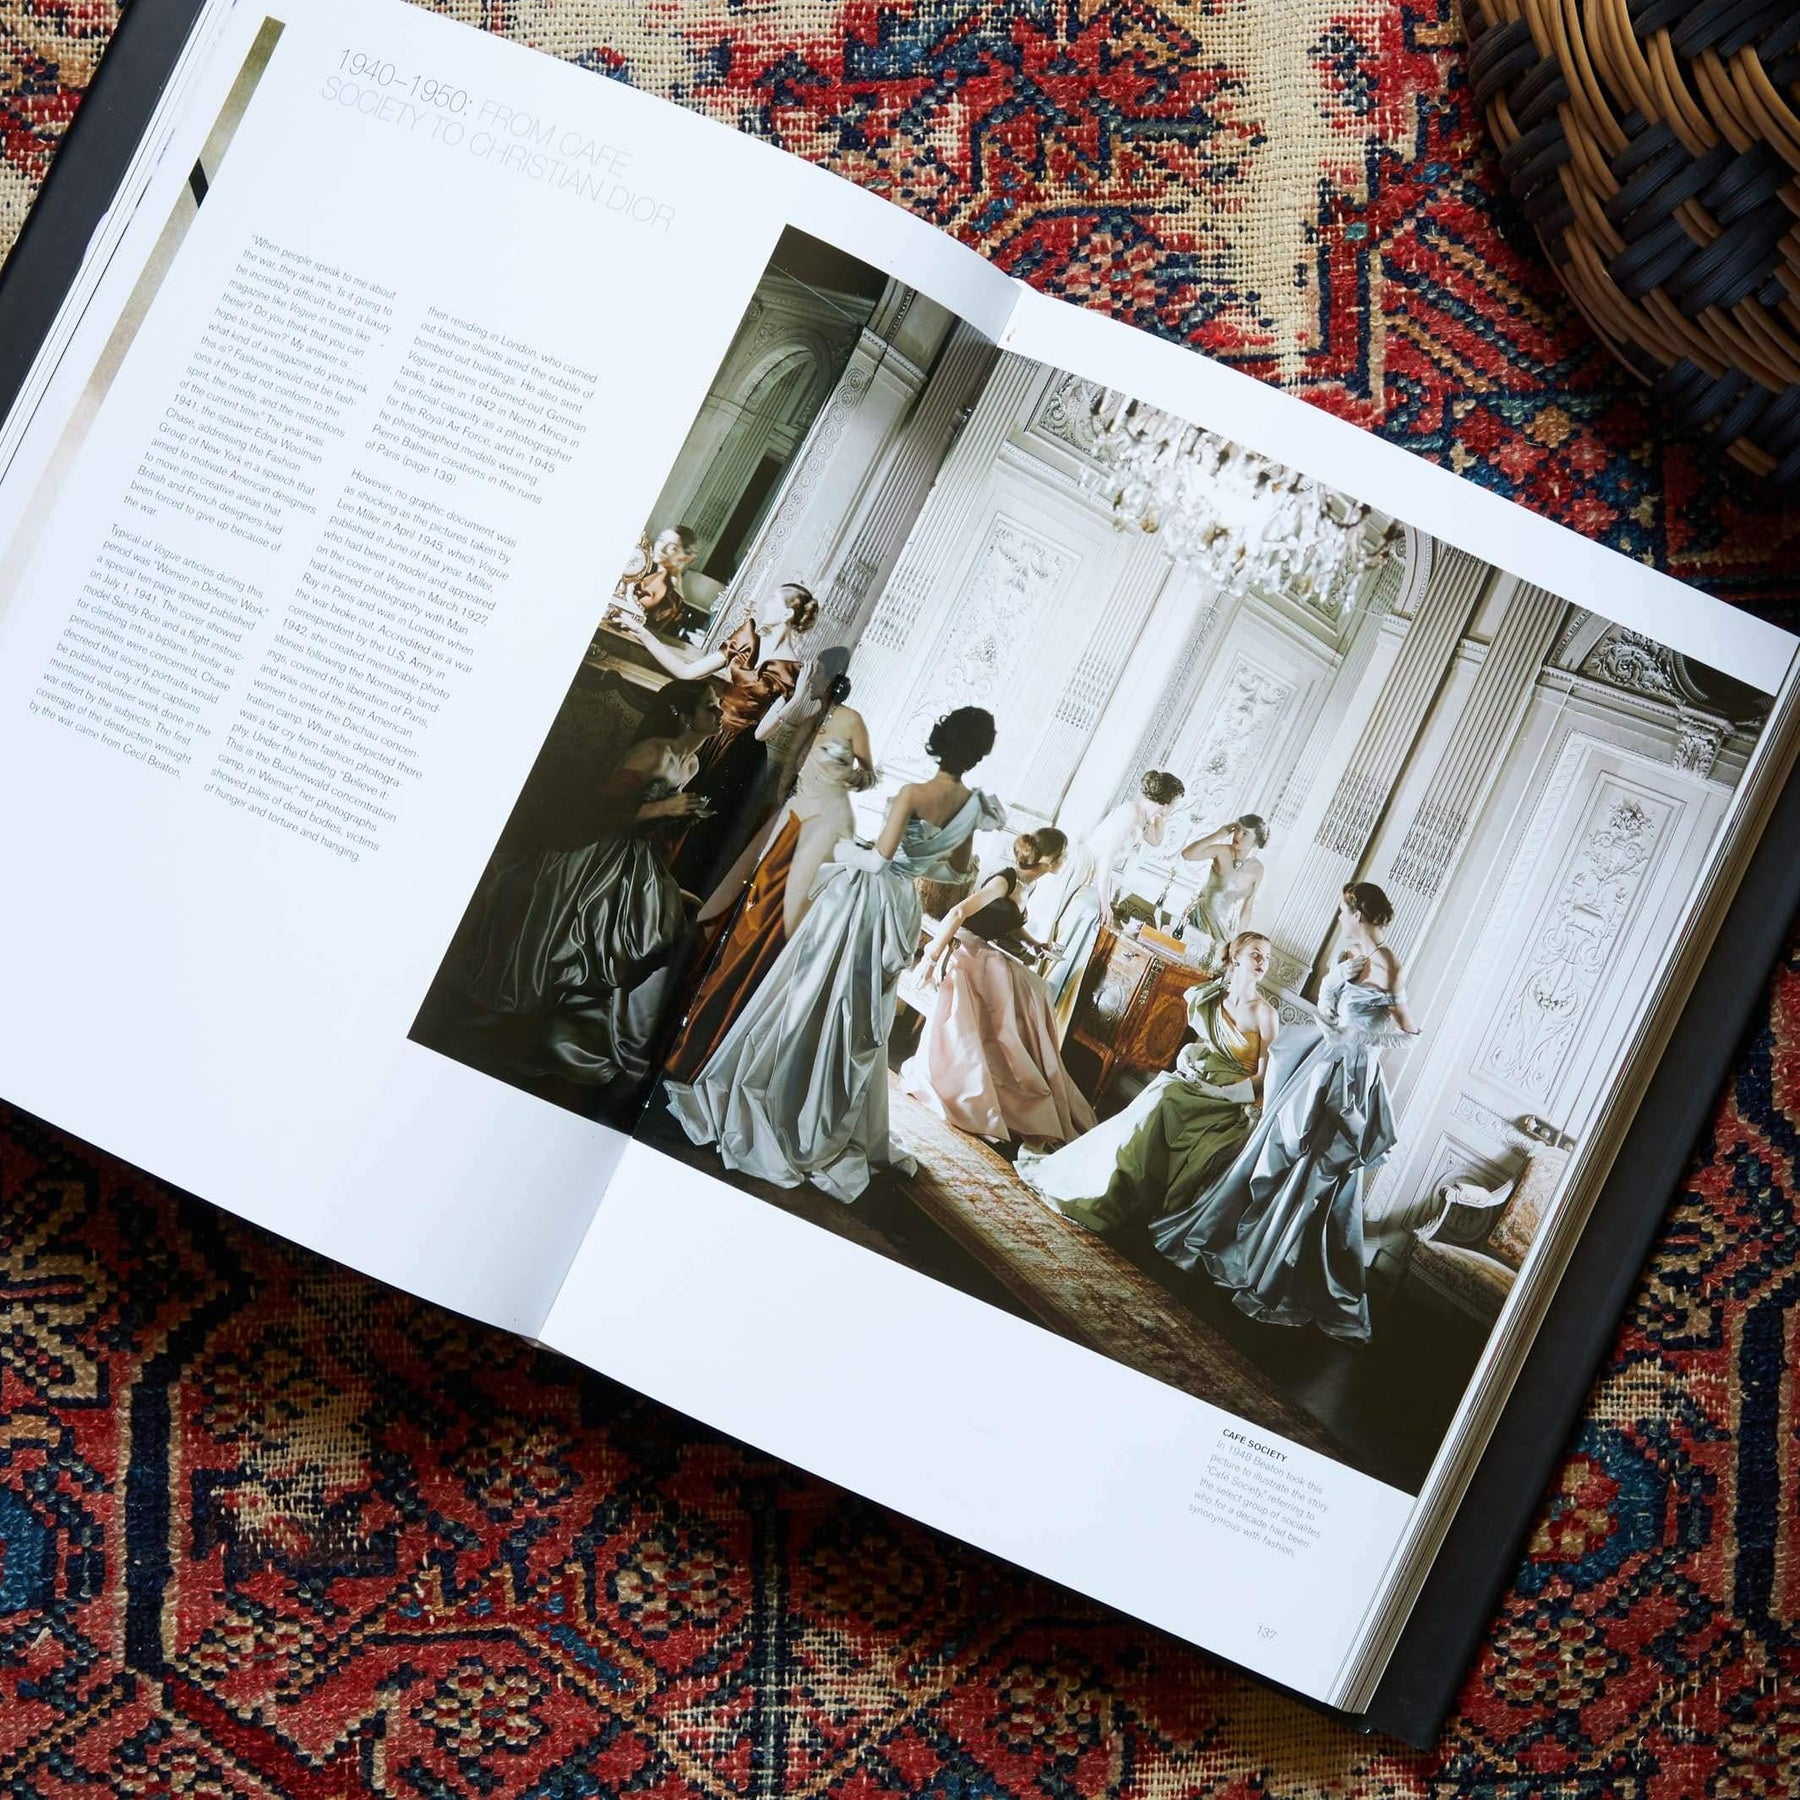 Vogue Illustrated History of the World's Most Famous Fashion Magazine